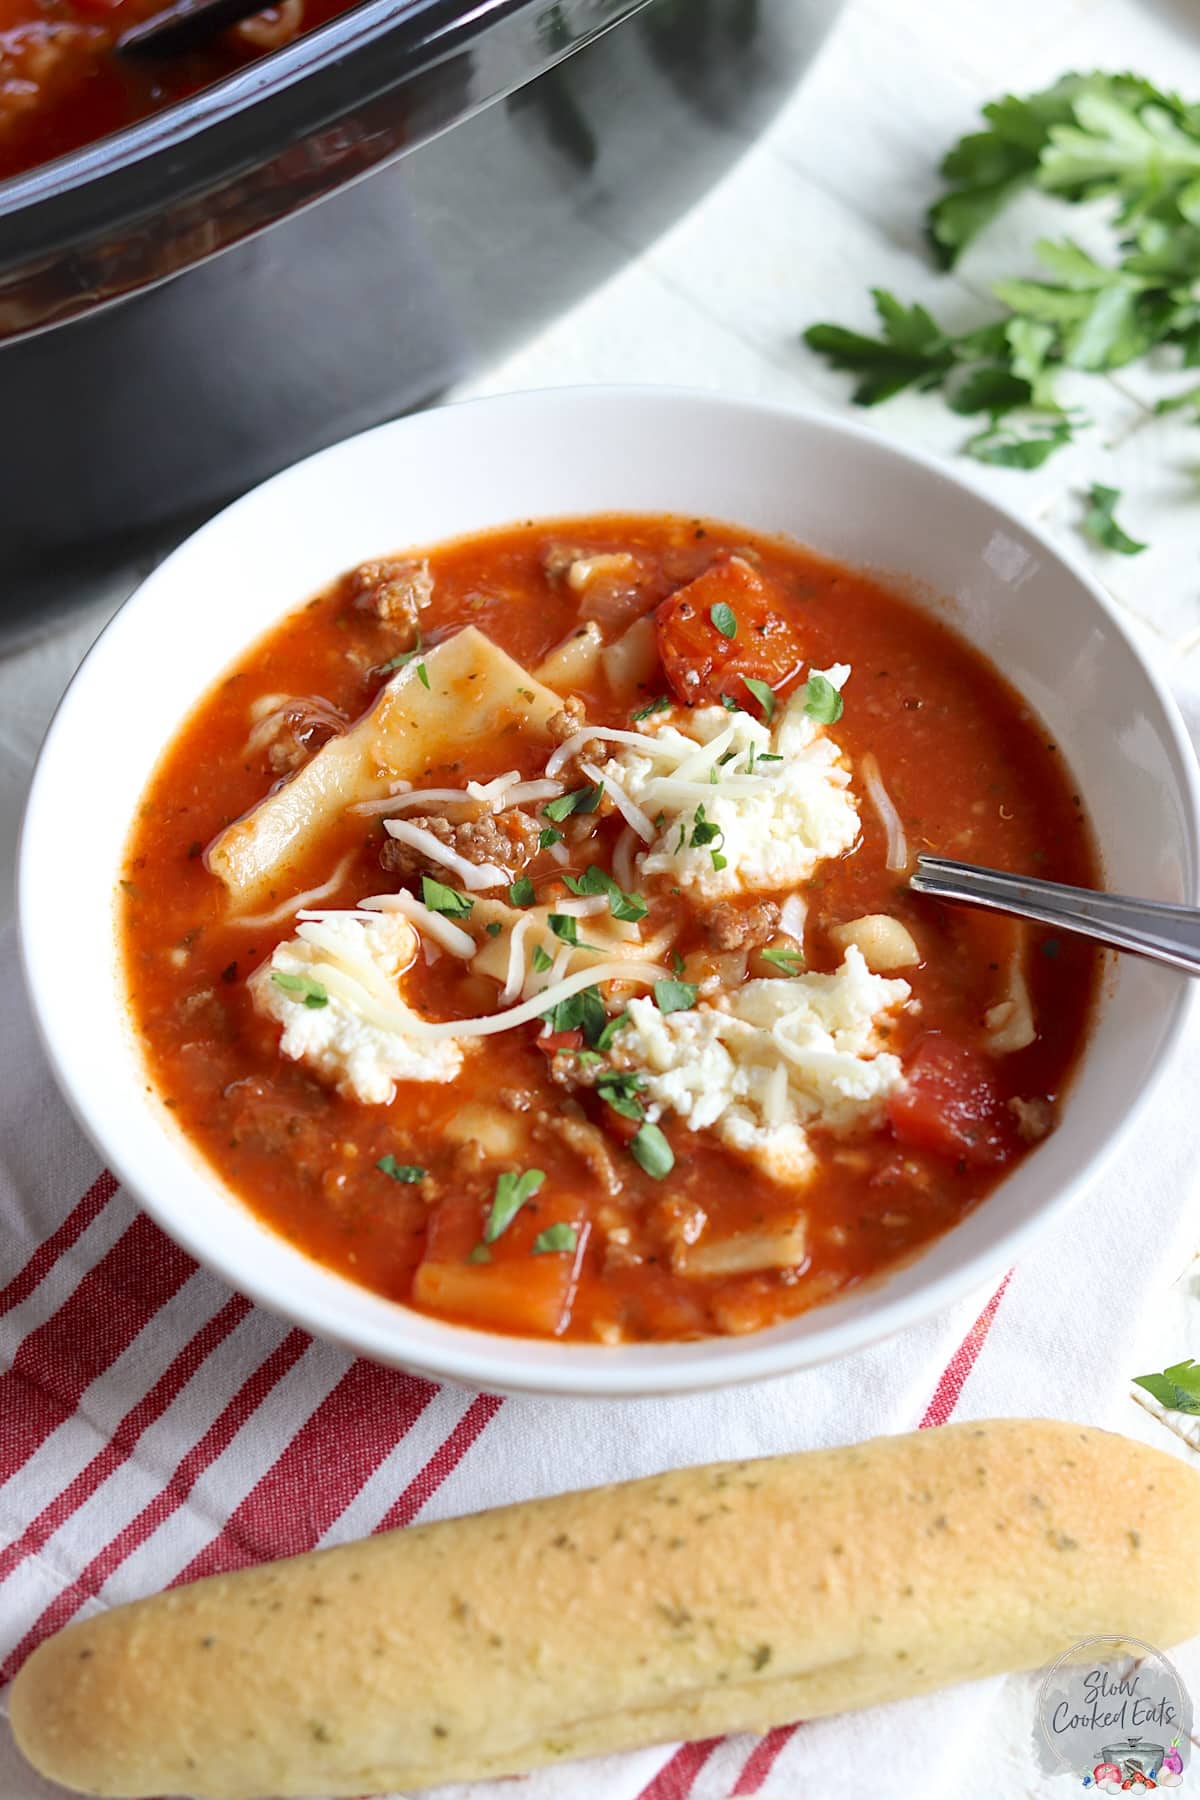 A breadstick and a white bowl of slow cooker lasagna soup on a red and white striped napkin.